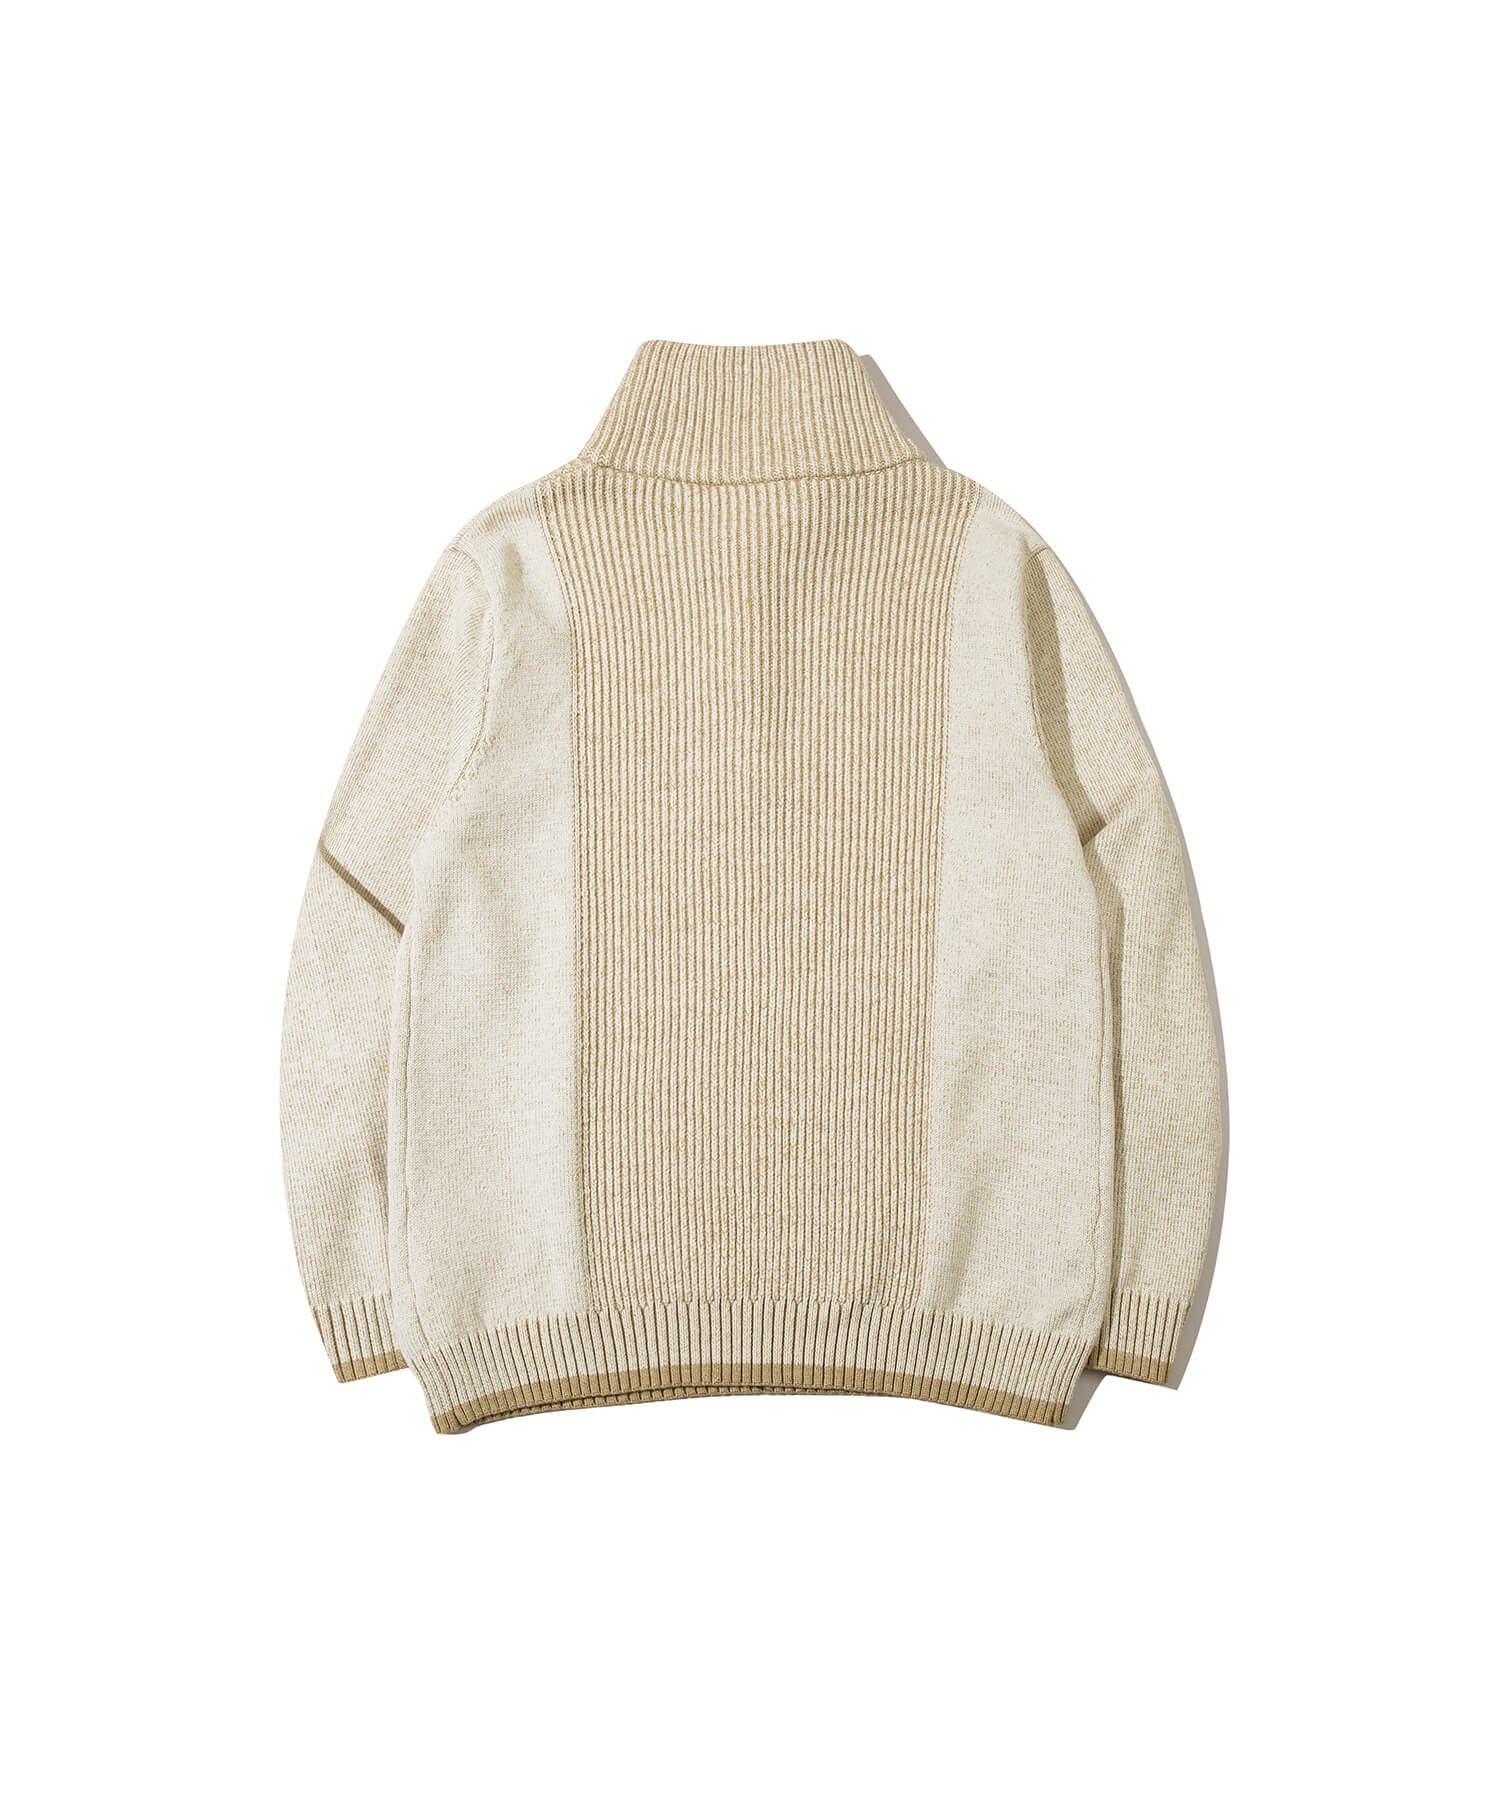 New!! Ribbed stripe sweater – S'more